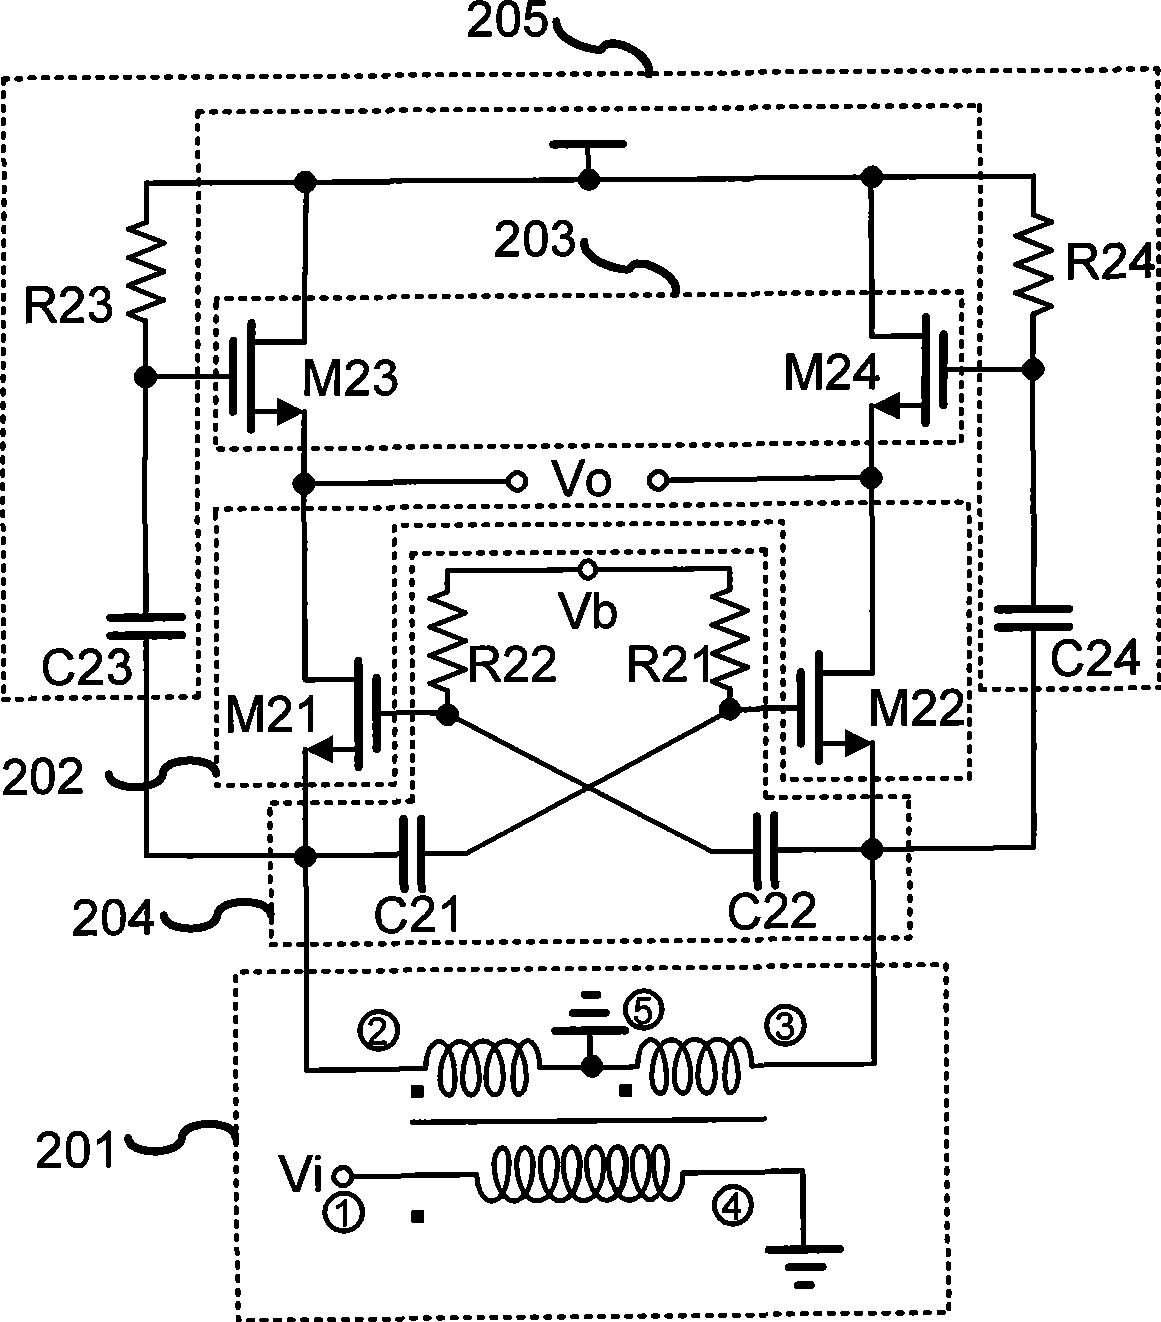 Low noise amplifier using multipath noise counteraction